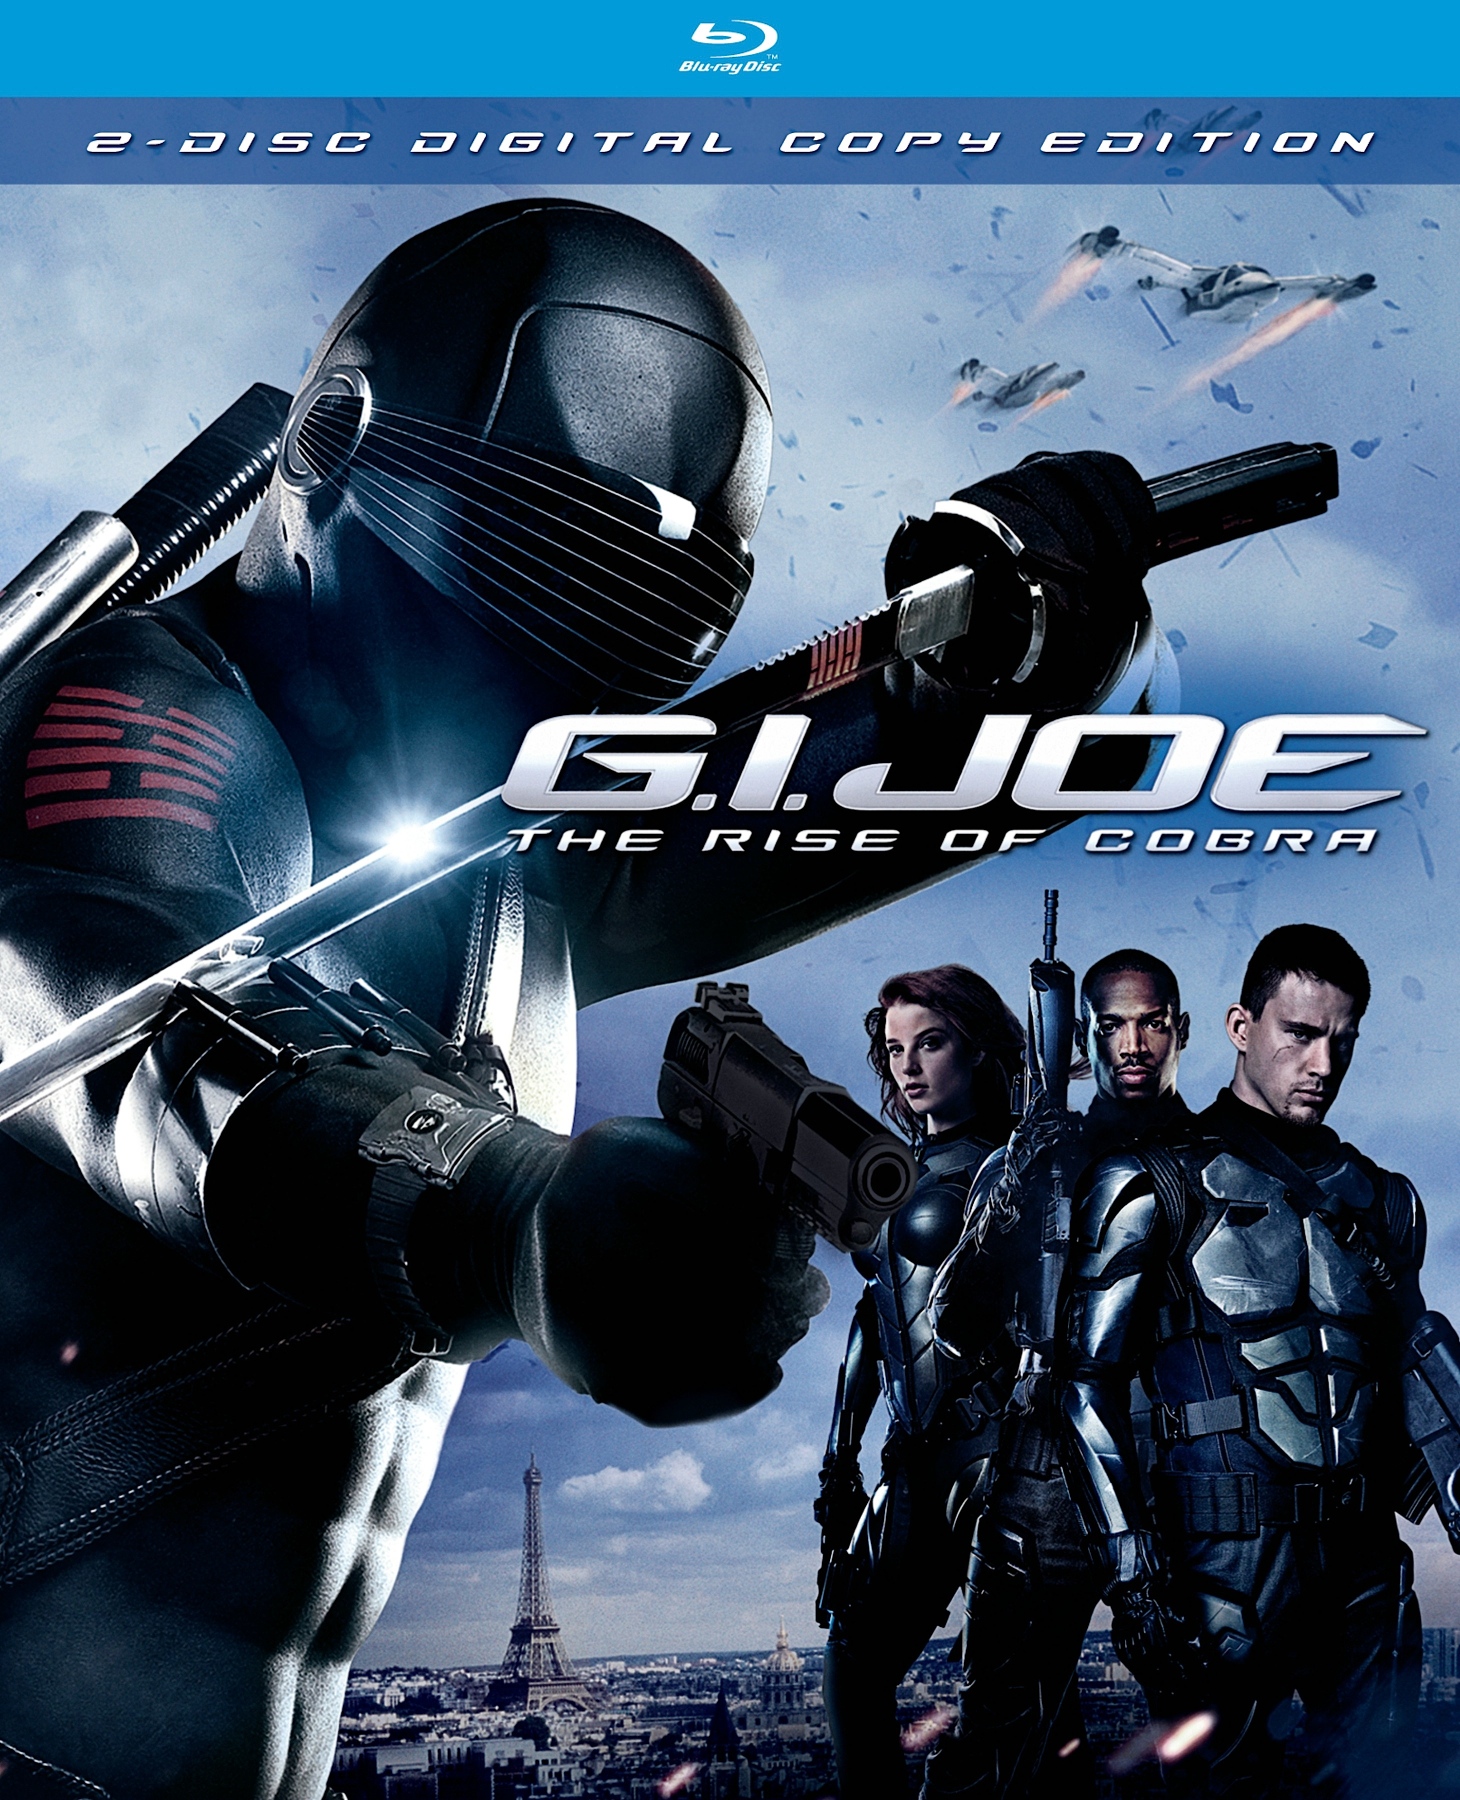 Nice Images Collection: G.I. Joe: The Rise Of Cobra Desktop Wallpapers